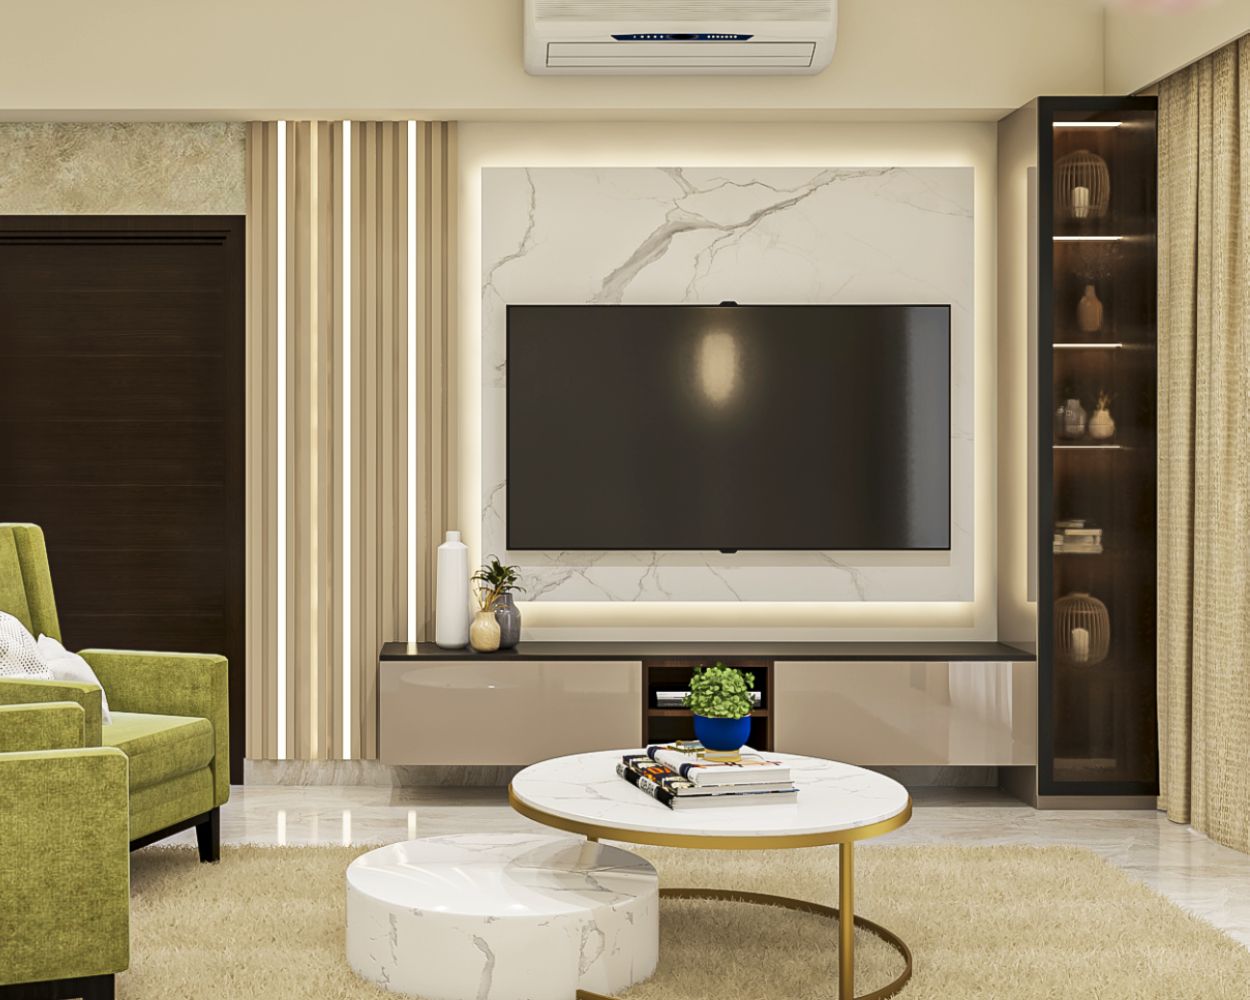 Modern Irish Cream And Wooden Wall-Mounted TV Unit Design With Glass Unit